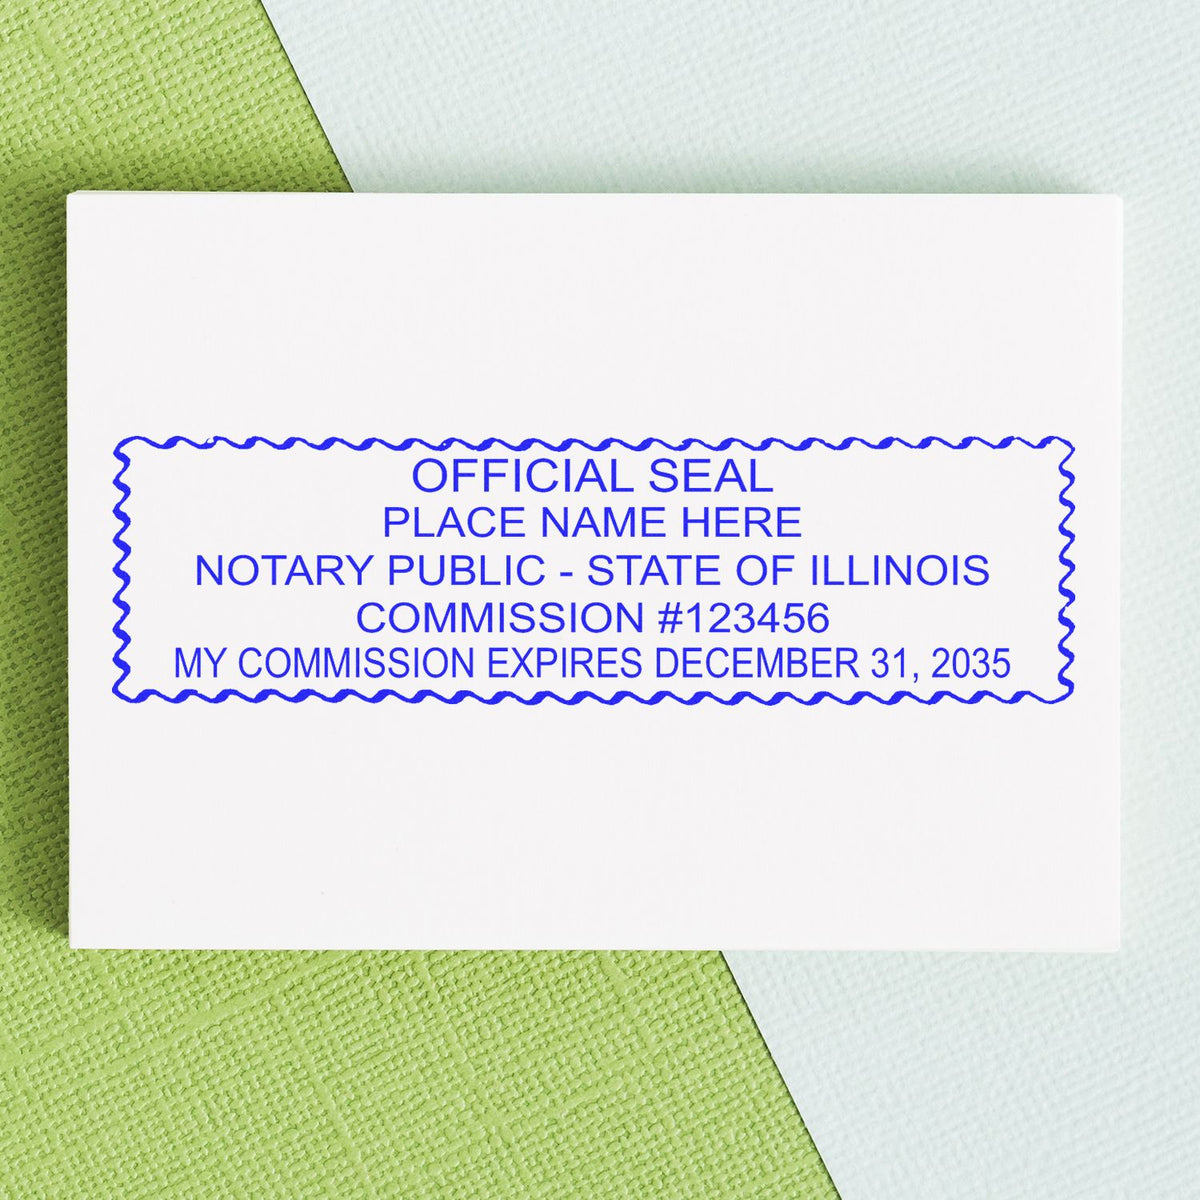 A photograph of the Self-Inking Rectangular Illinois Notary Stamp stamp impression reveals a vivid, professional image of the on paper.